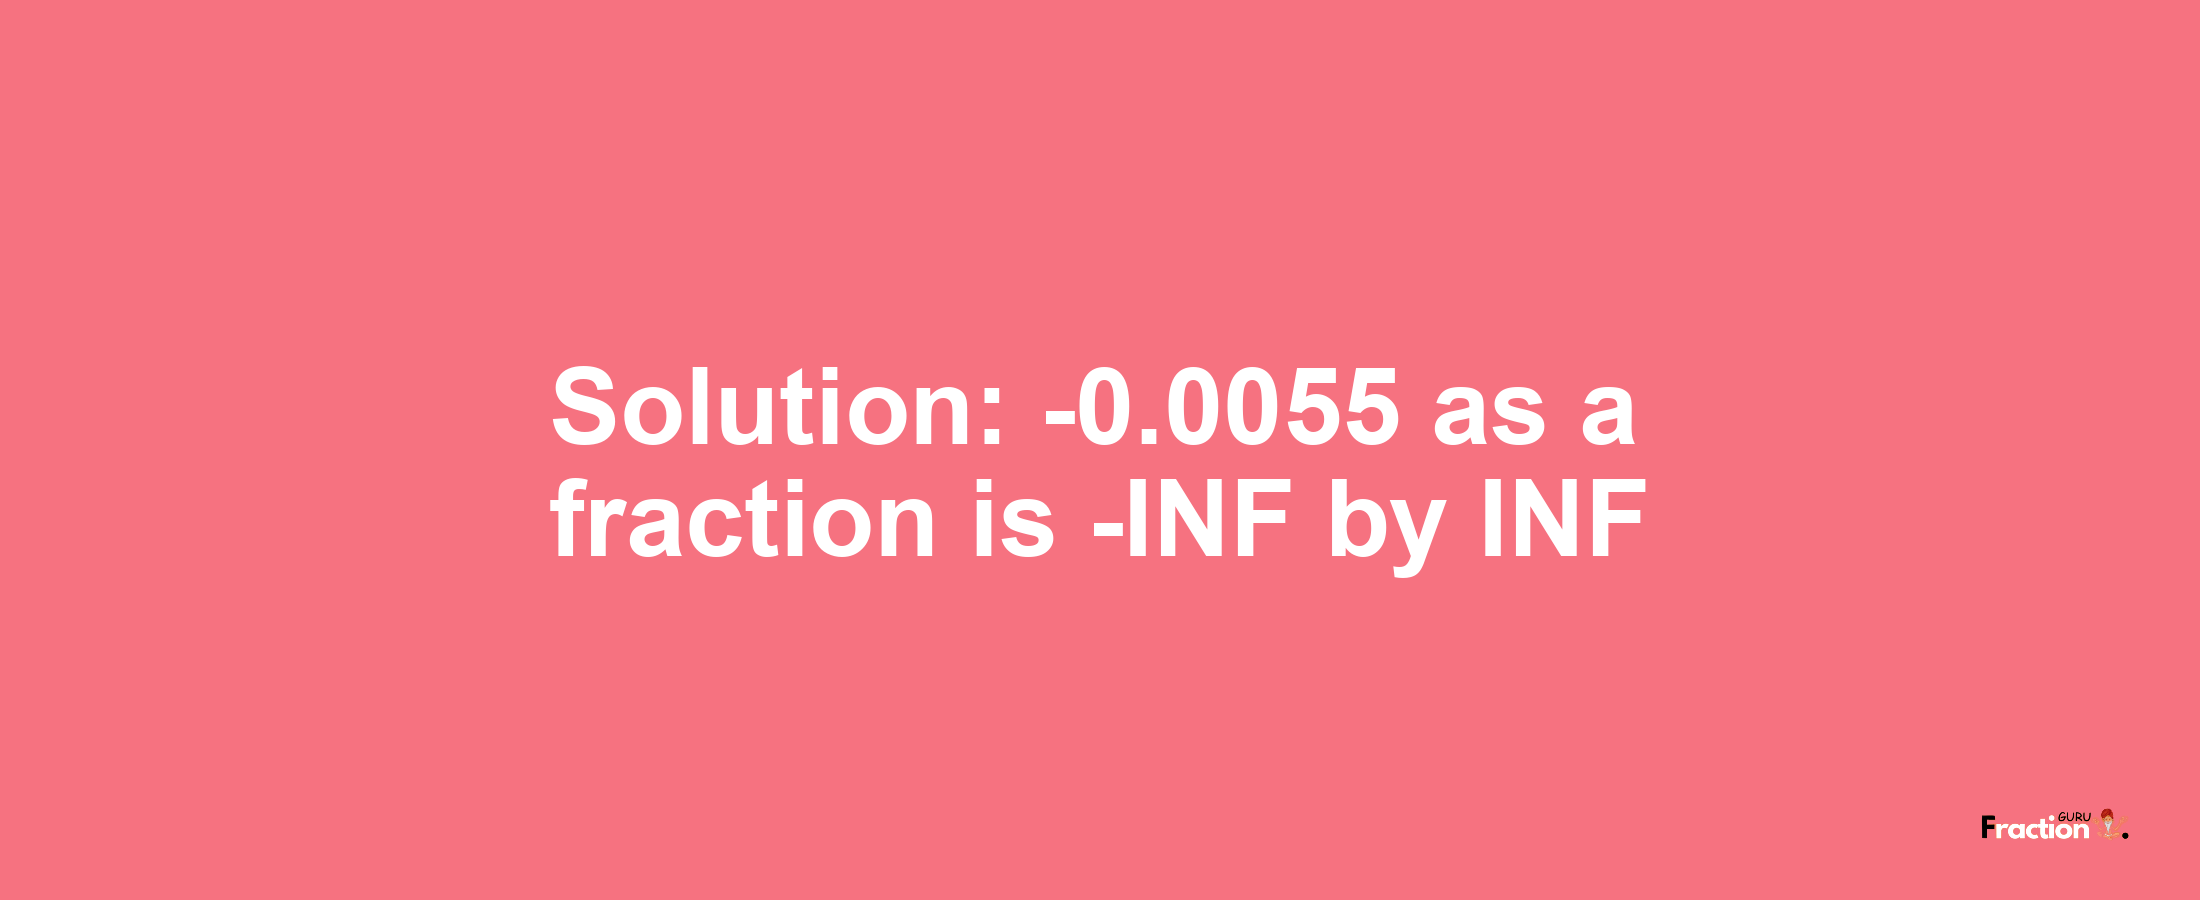 Solution:-0.0055 as a fraction is -INF/INF